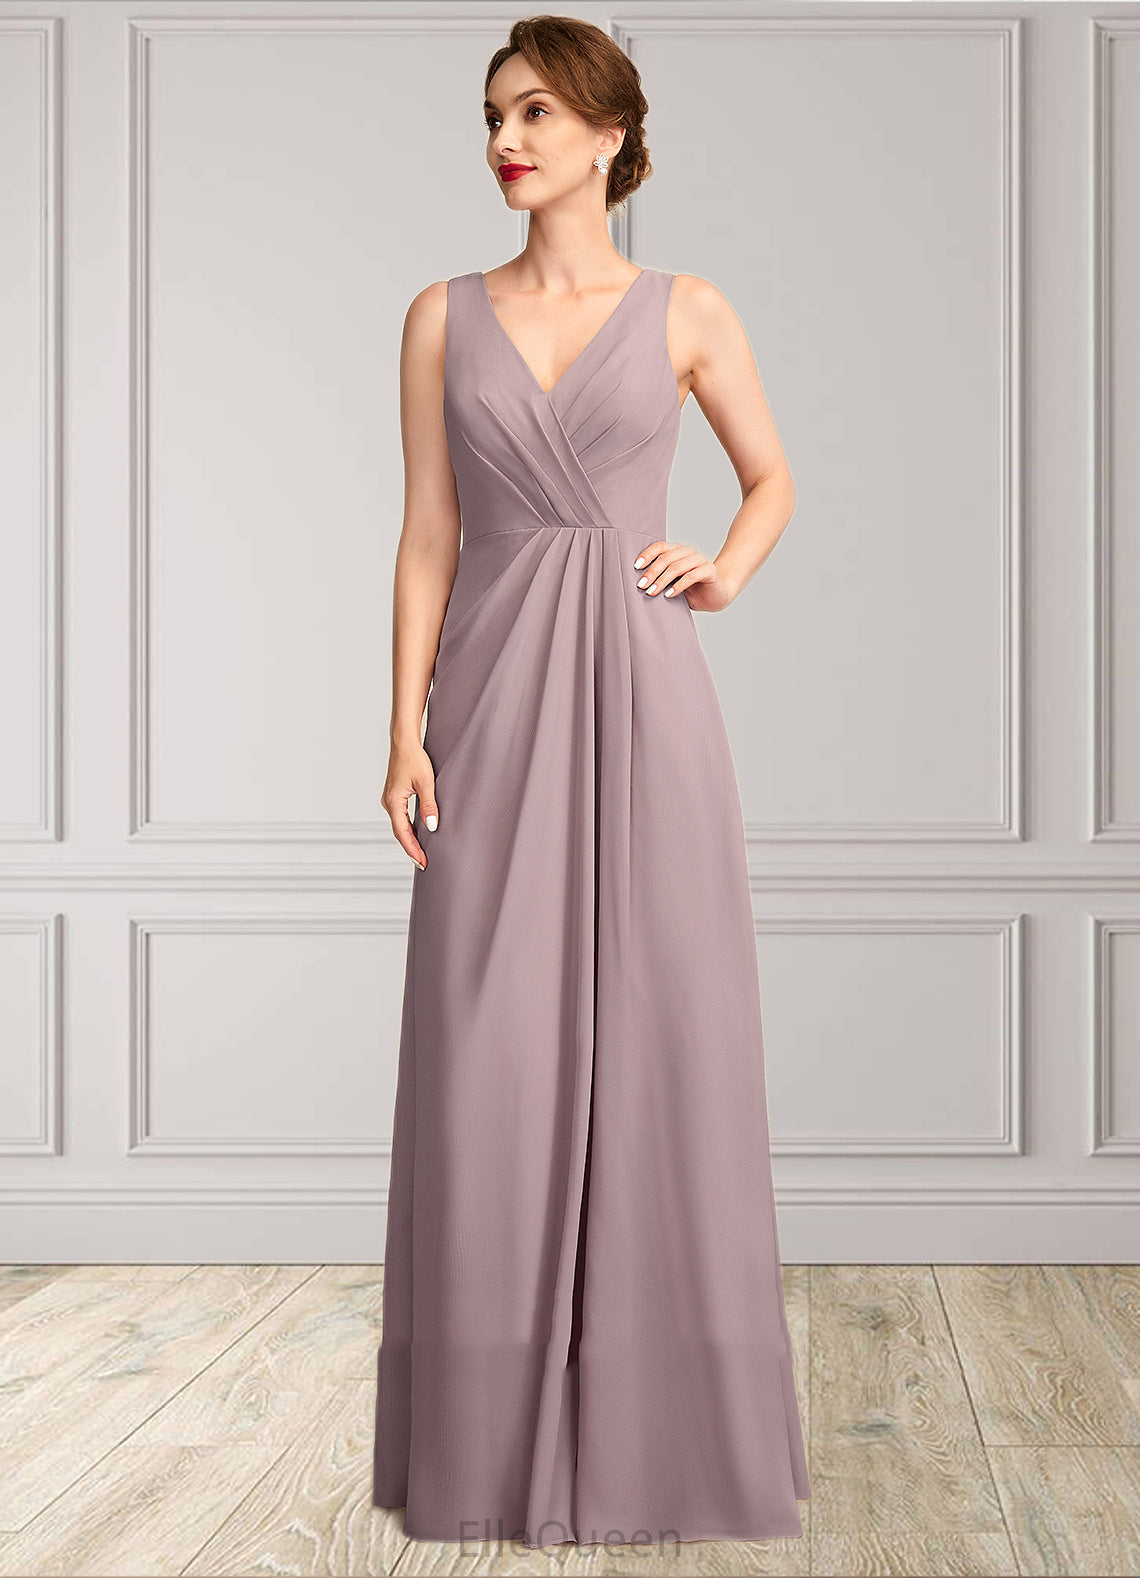 Willow A-Line V-neck Floor-Length Chiffon Mother of the Bride Dress With Ruffle DG126P0015026